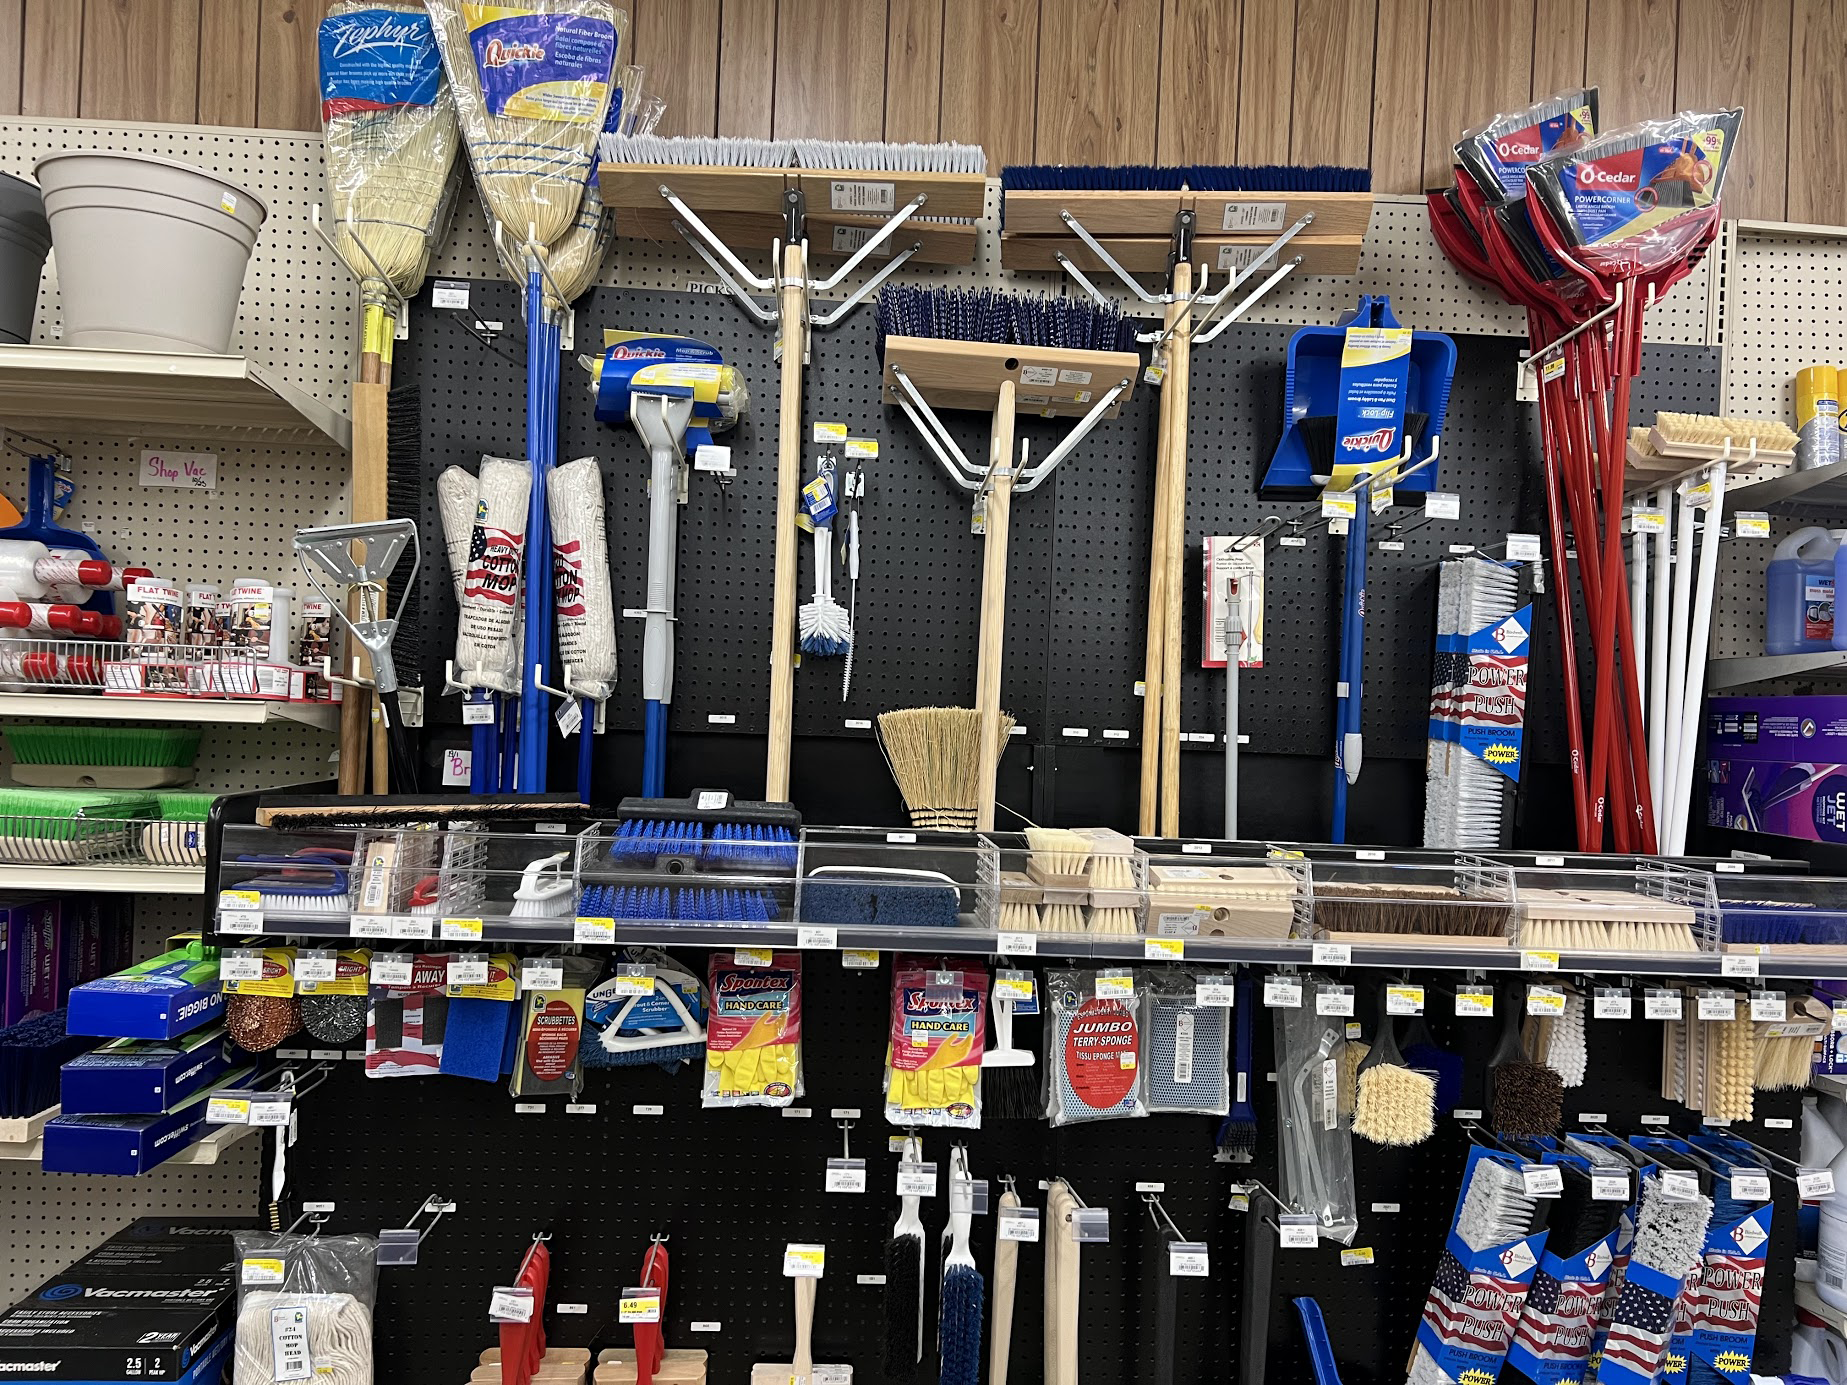 Don't waste your time running all over to get things for your house when you can stop by your local Hardware store Ideal Supplies and get household waste supplies.